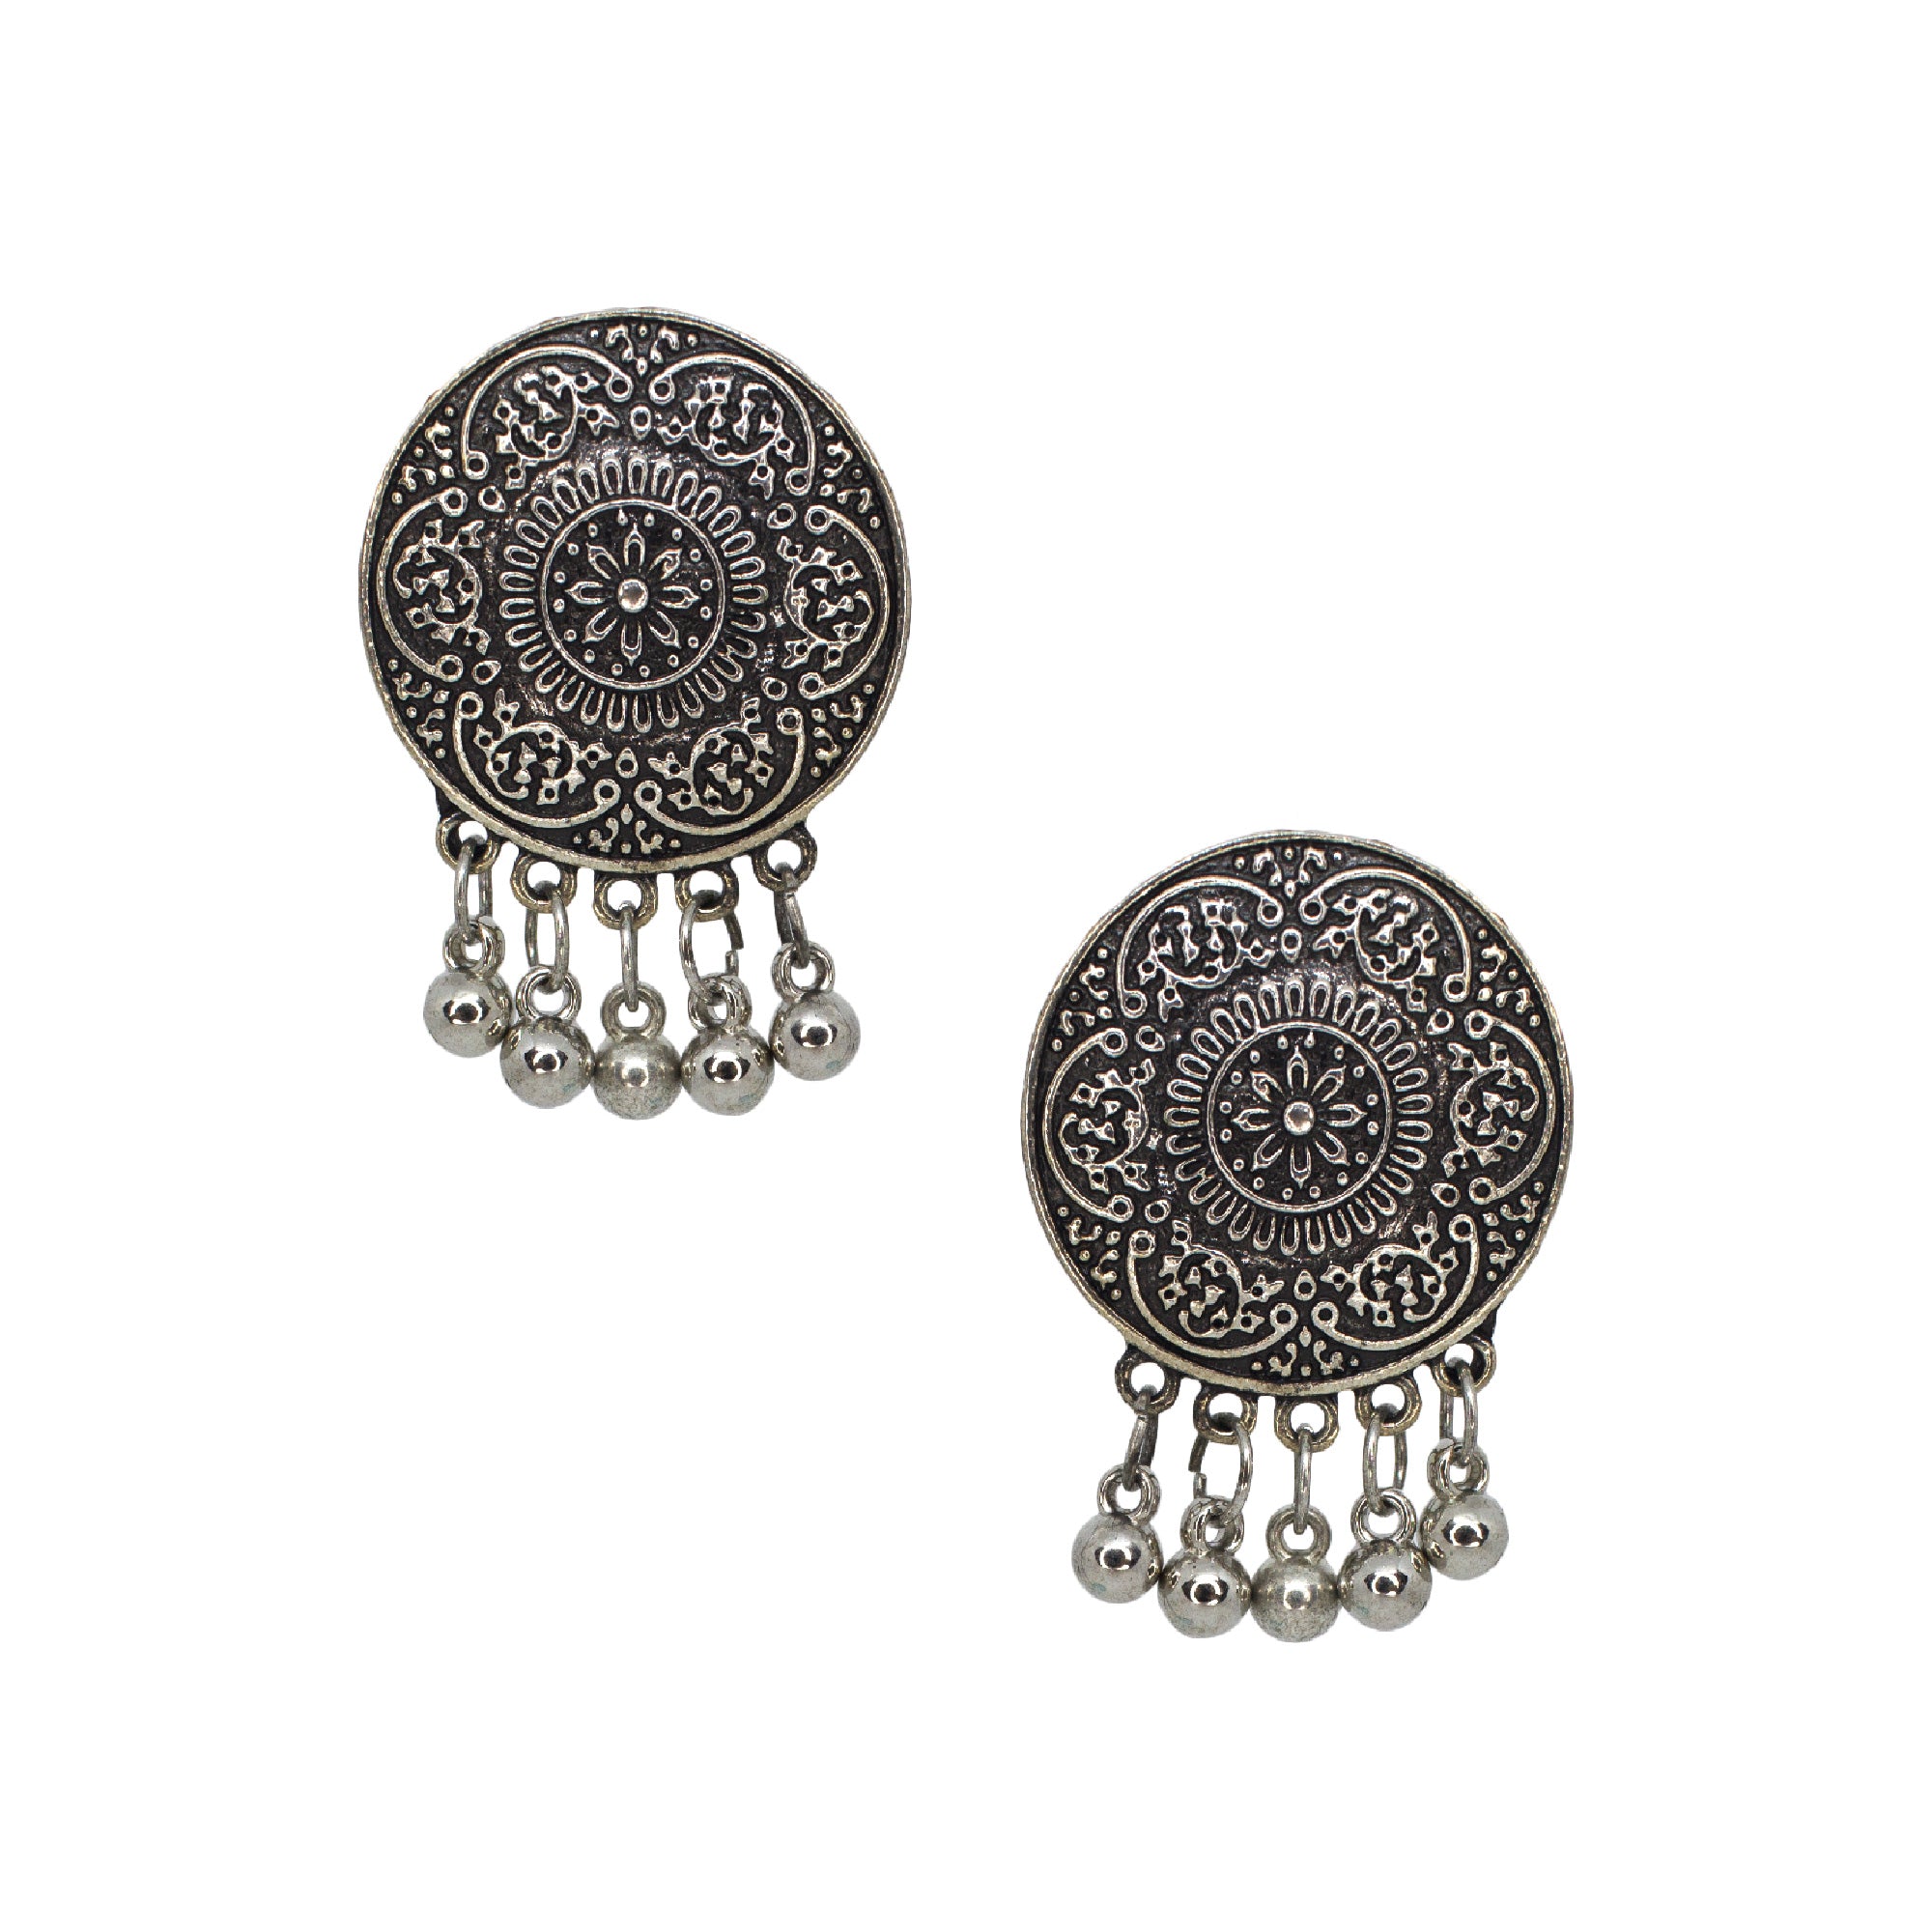 Floral Design Silver Oxidised Studs Earrings With Silver Beads